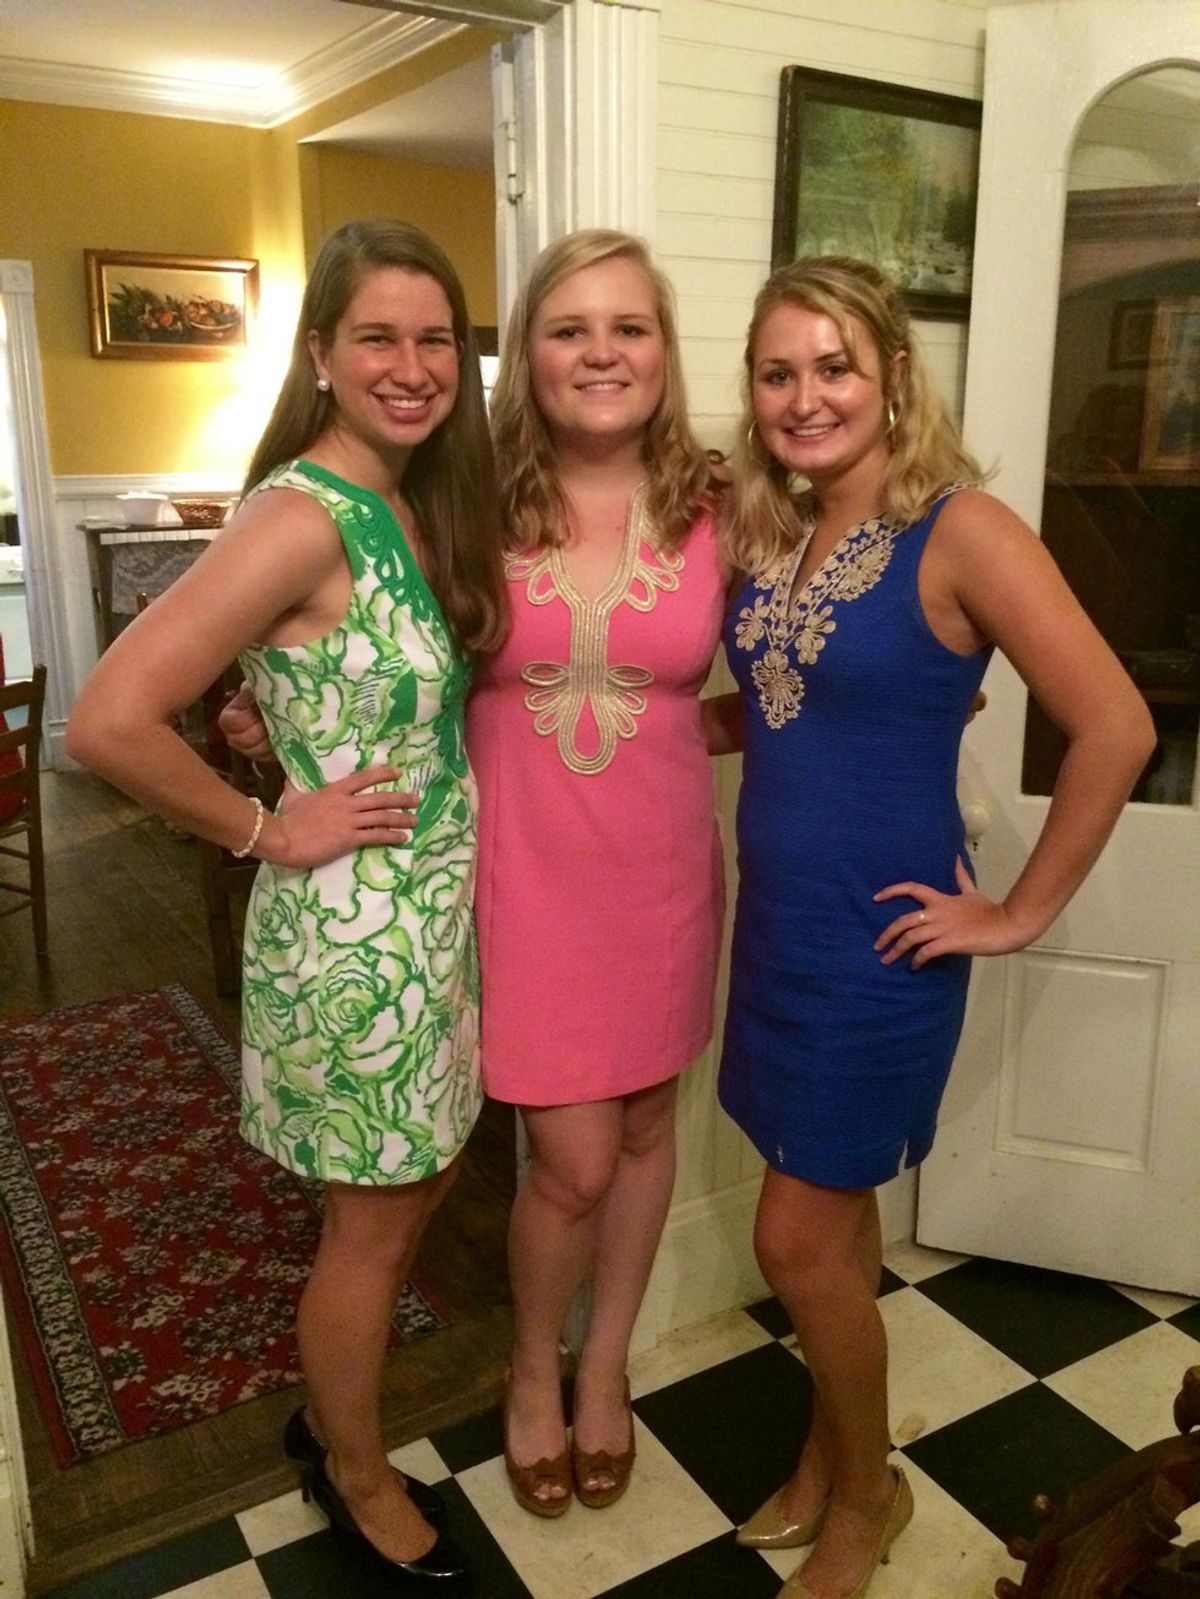 A Love Letter To Lilly Pulitzer